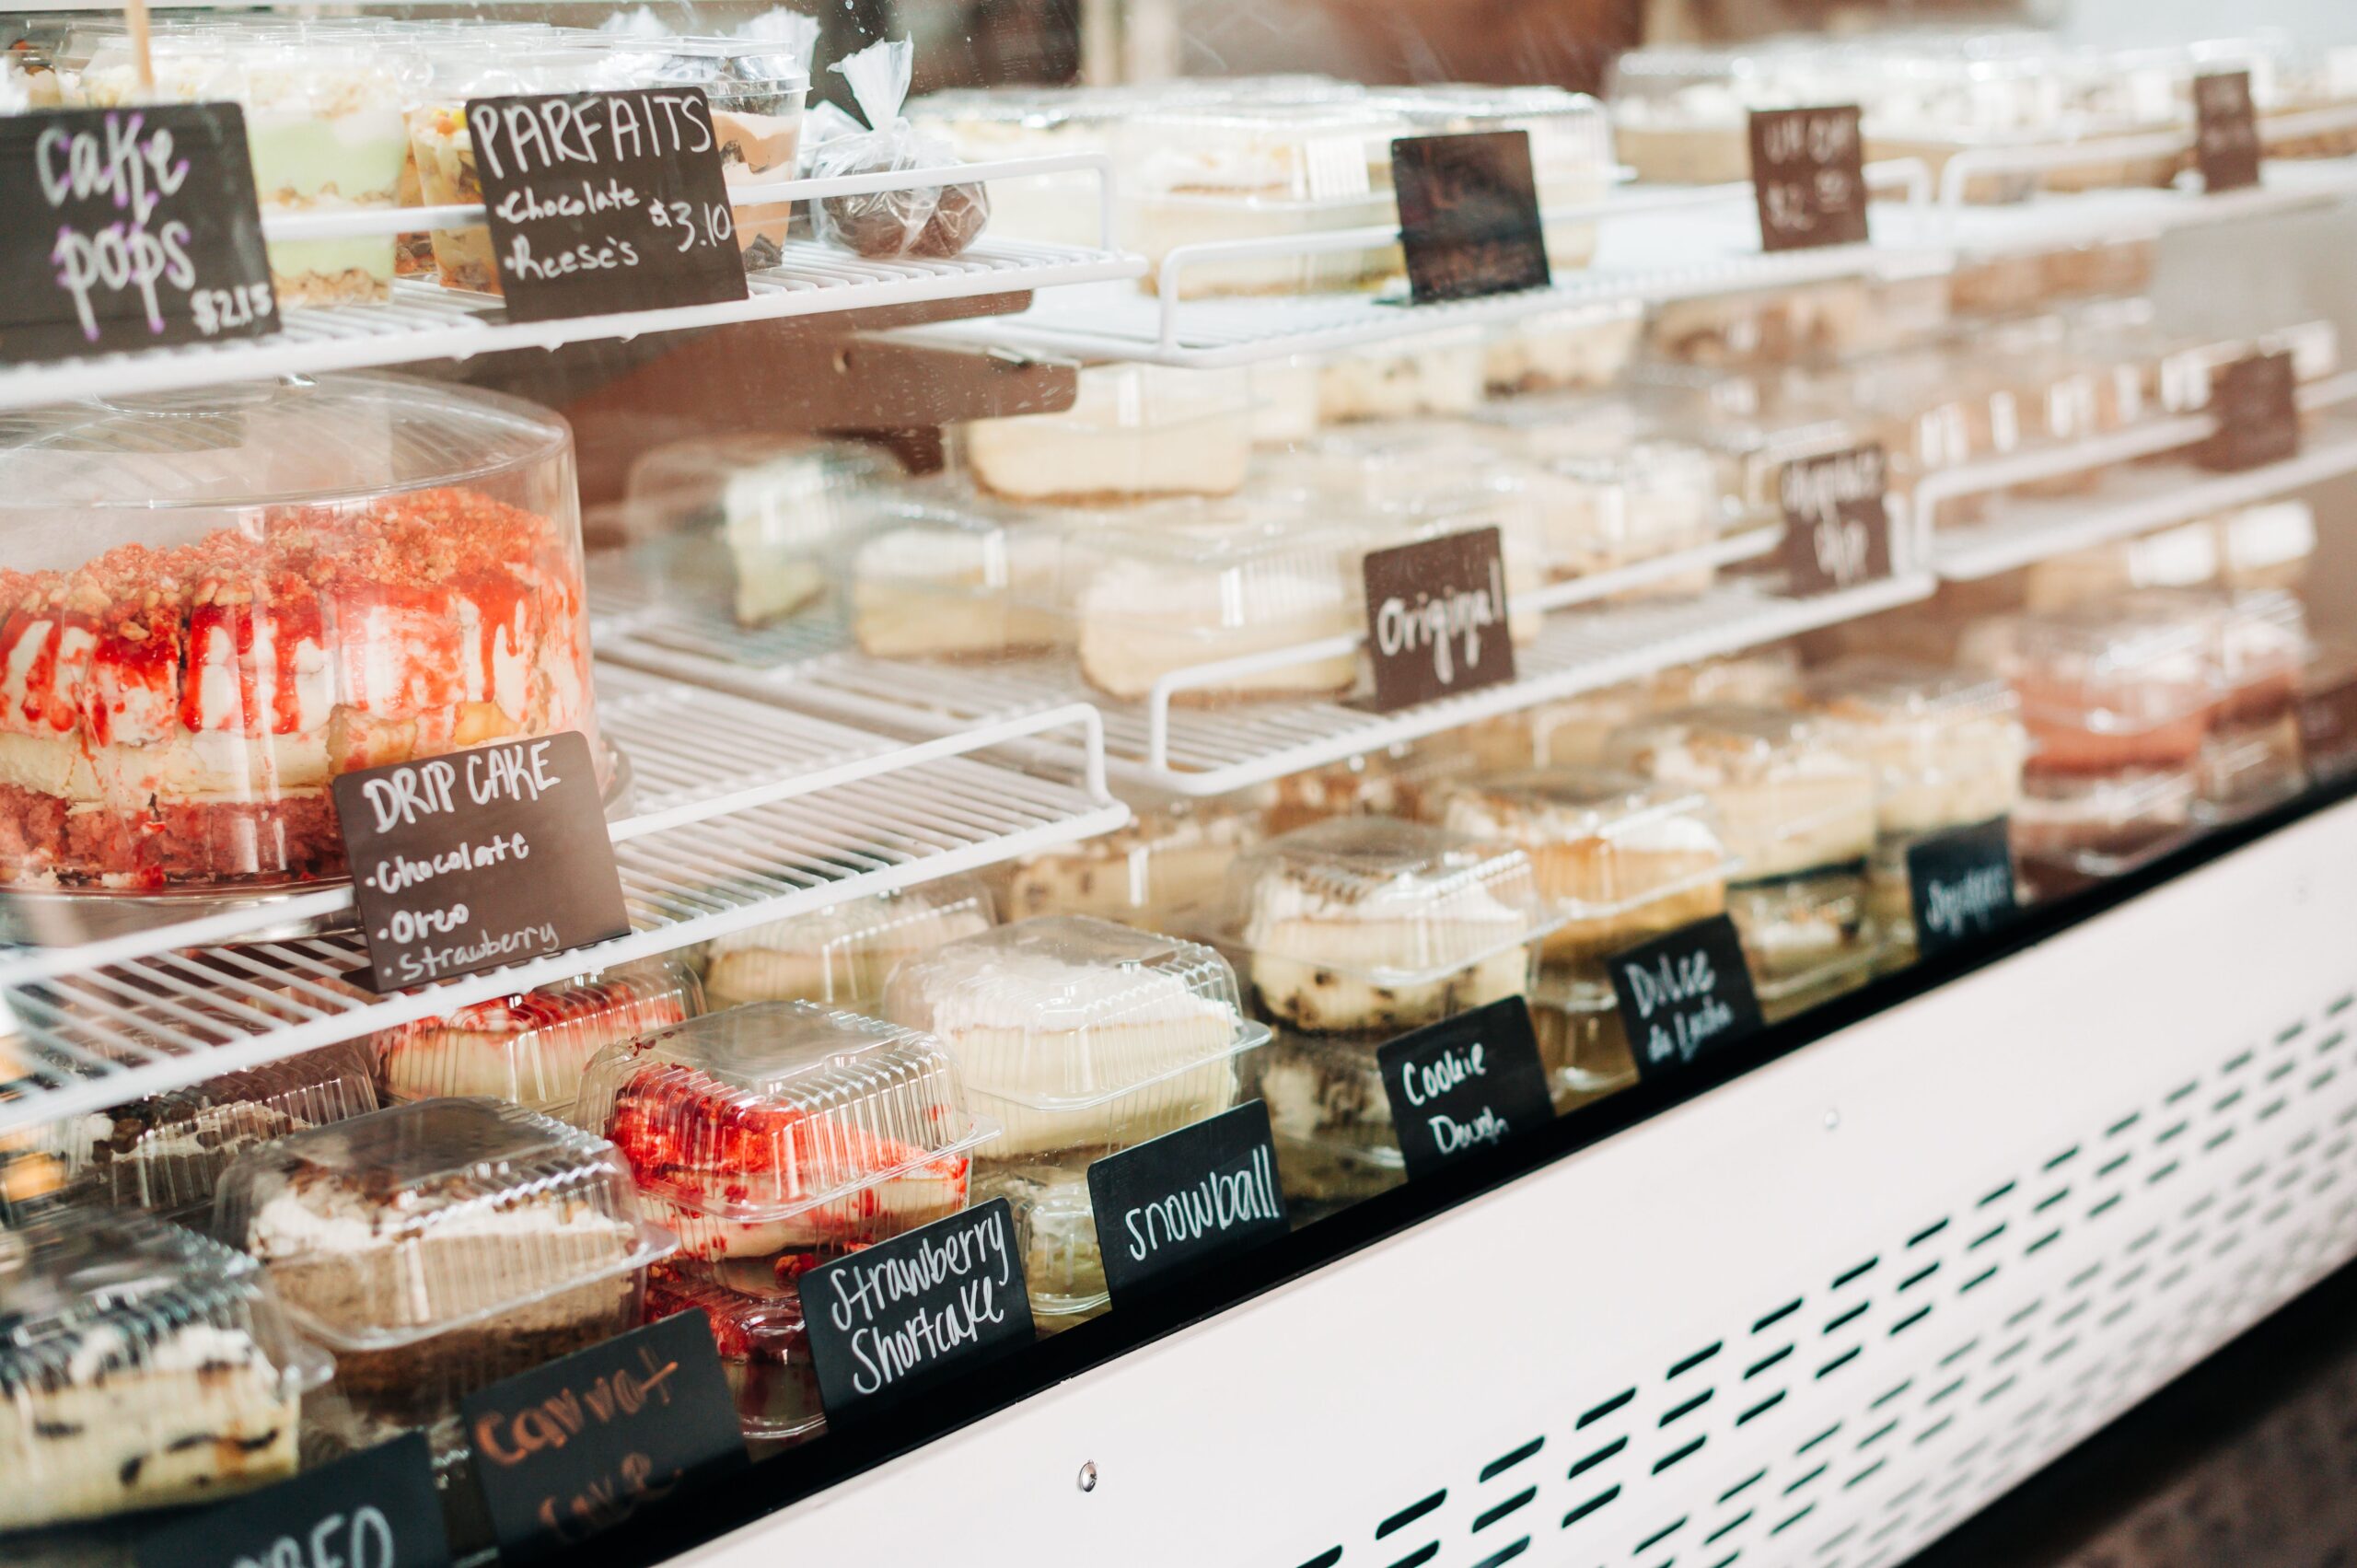 A glass bakery case with a variety of cheesecakes, cakes, and pies.